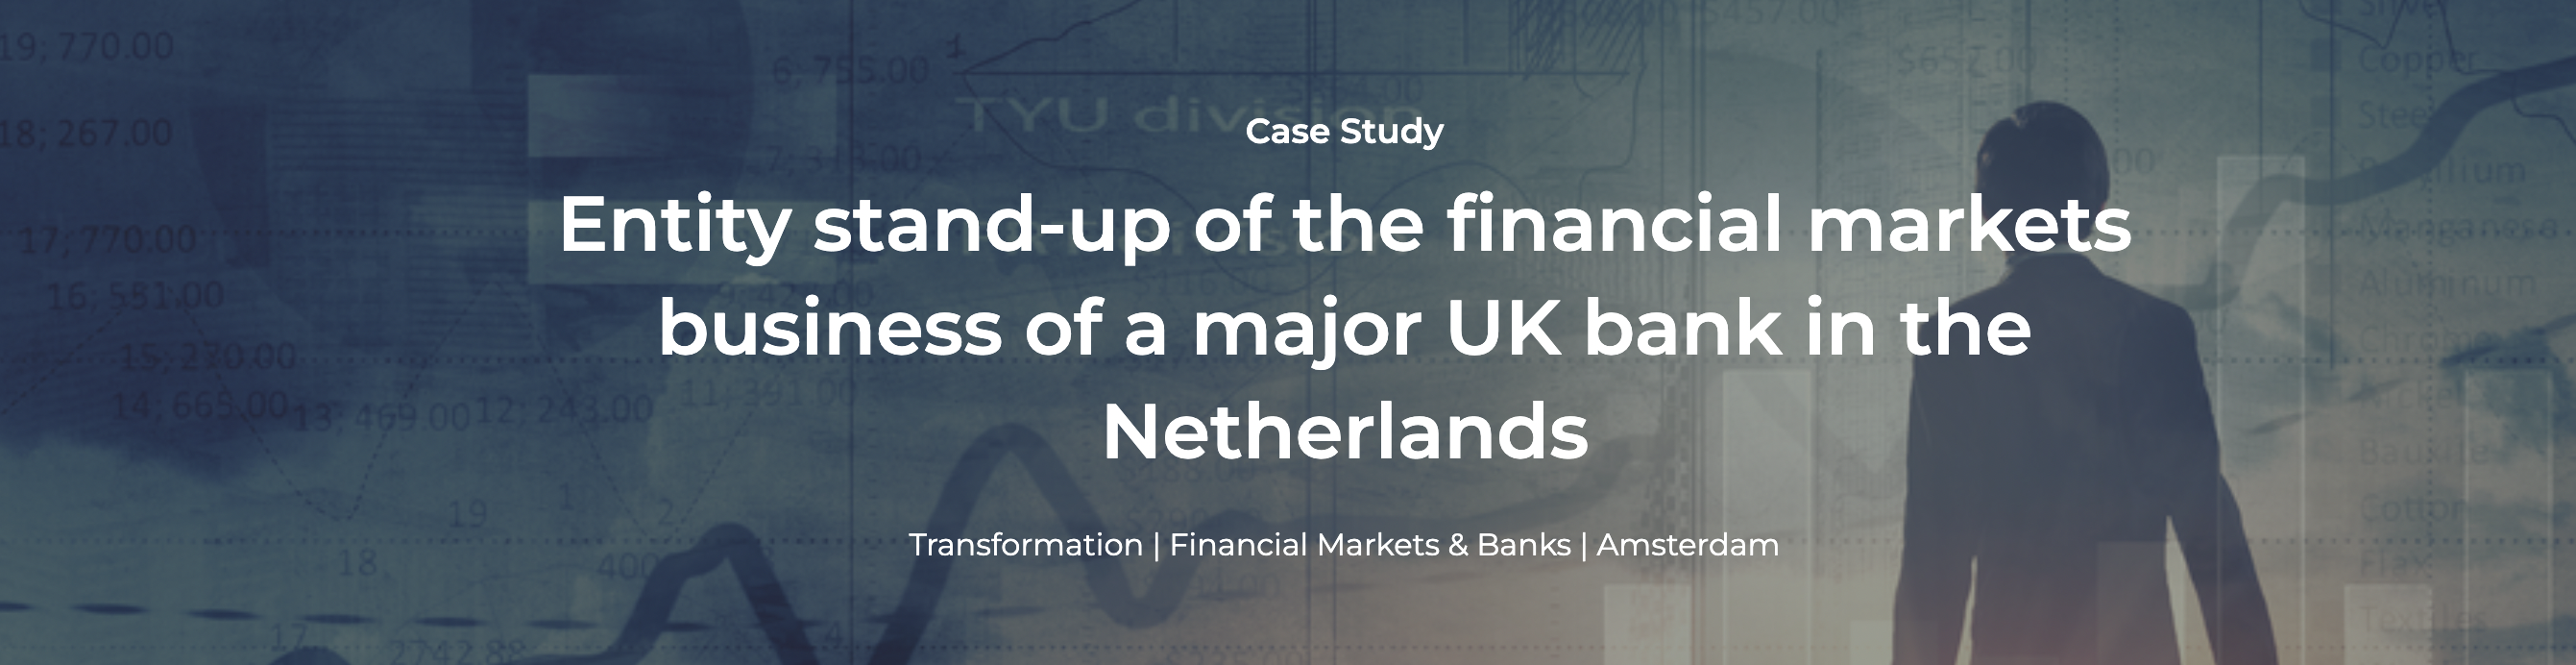 Transformation Case Study: Entity stand-up of a financial markets business